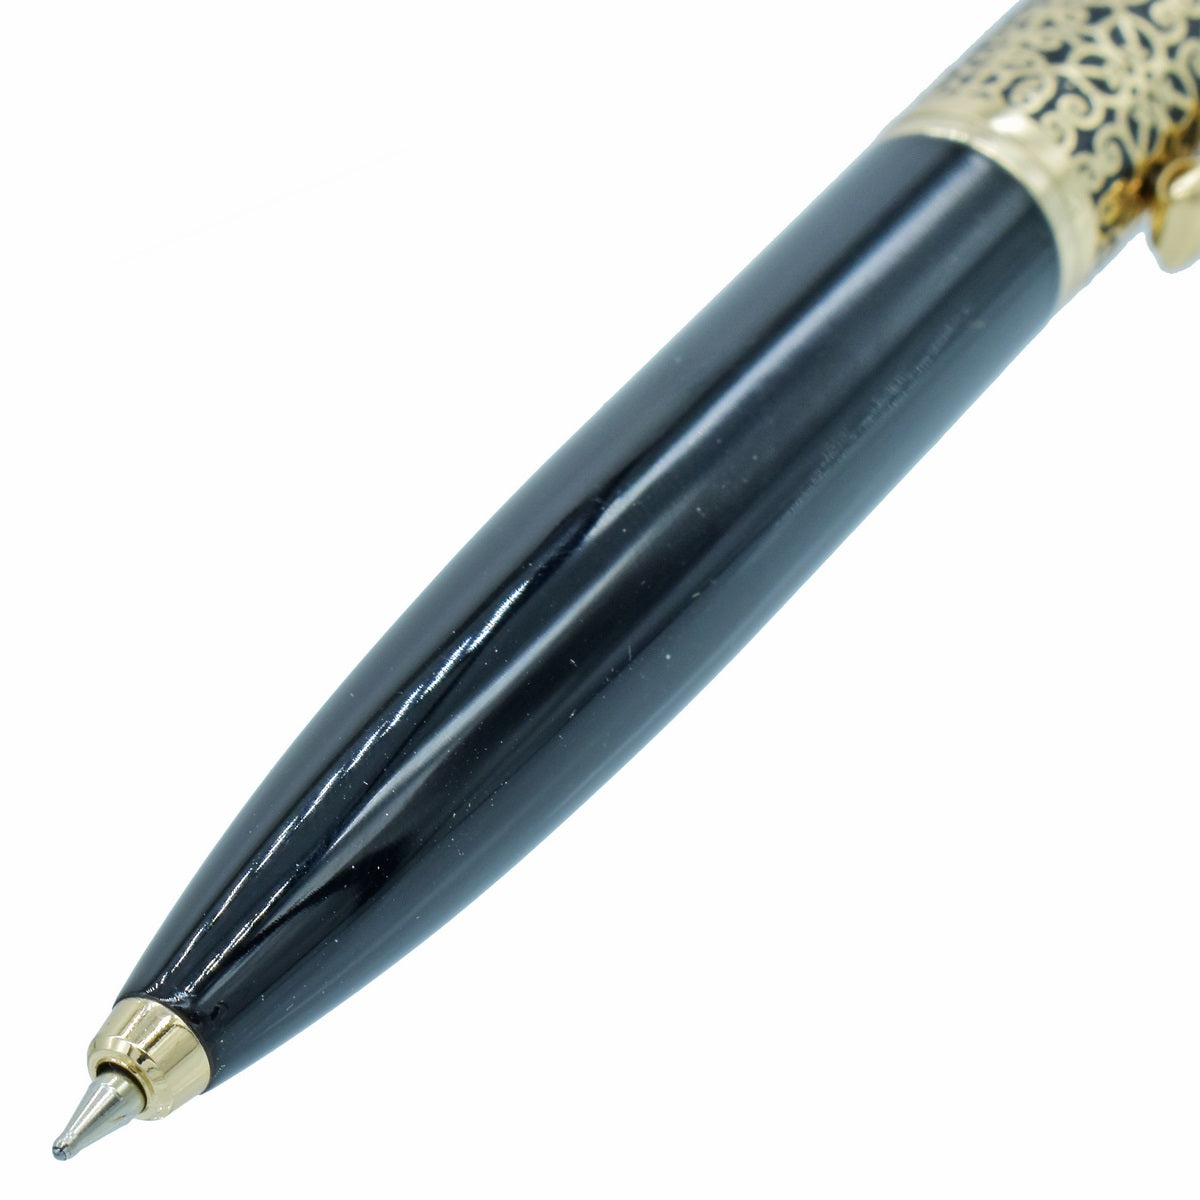 Black Color Ball Pen with Mini Cobalt Antic - For Office, College, Personal Use - Bhilai